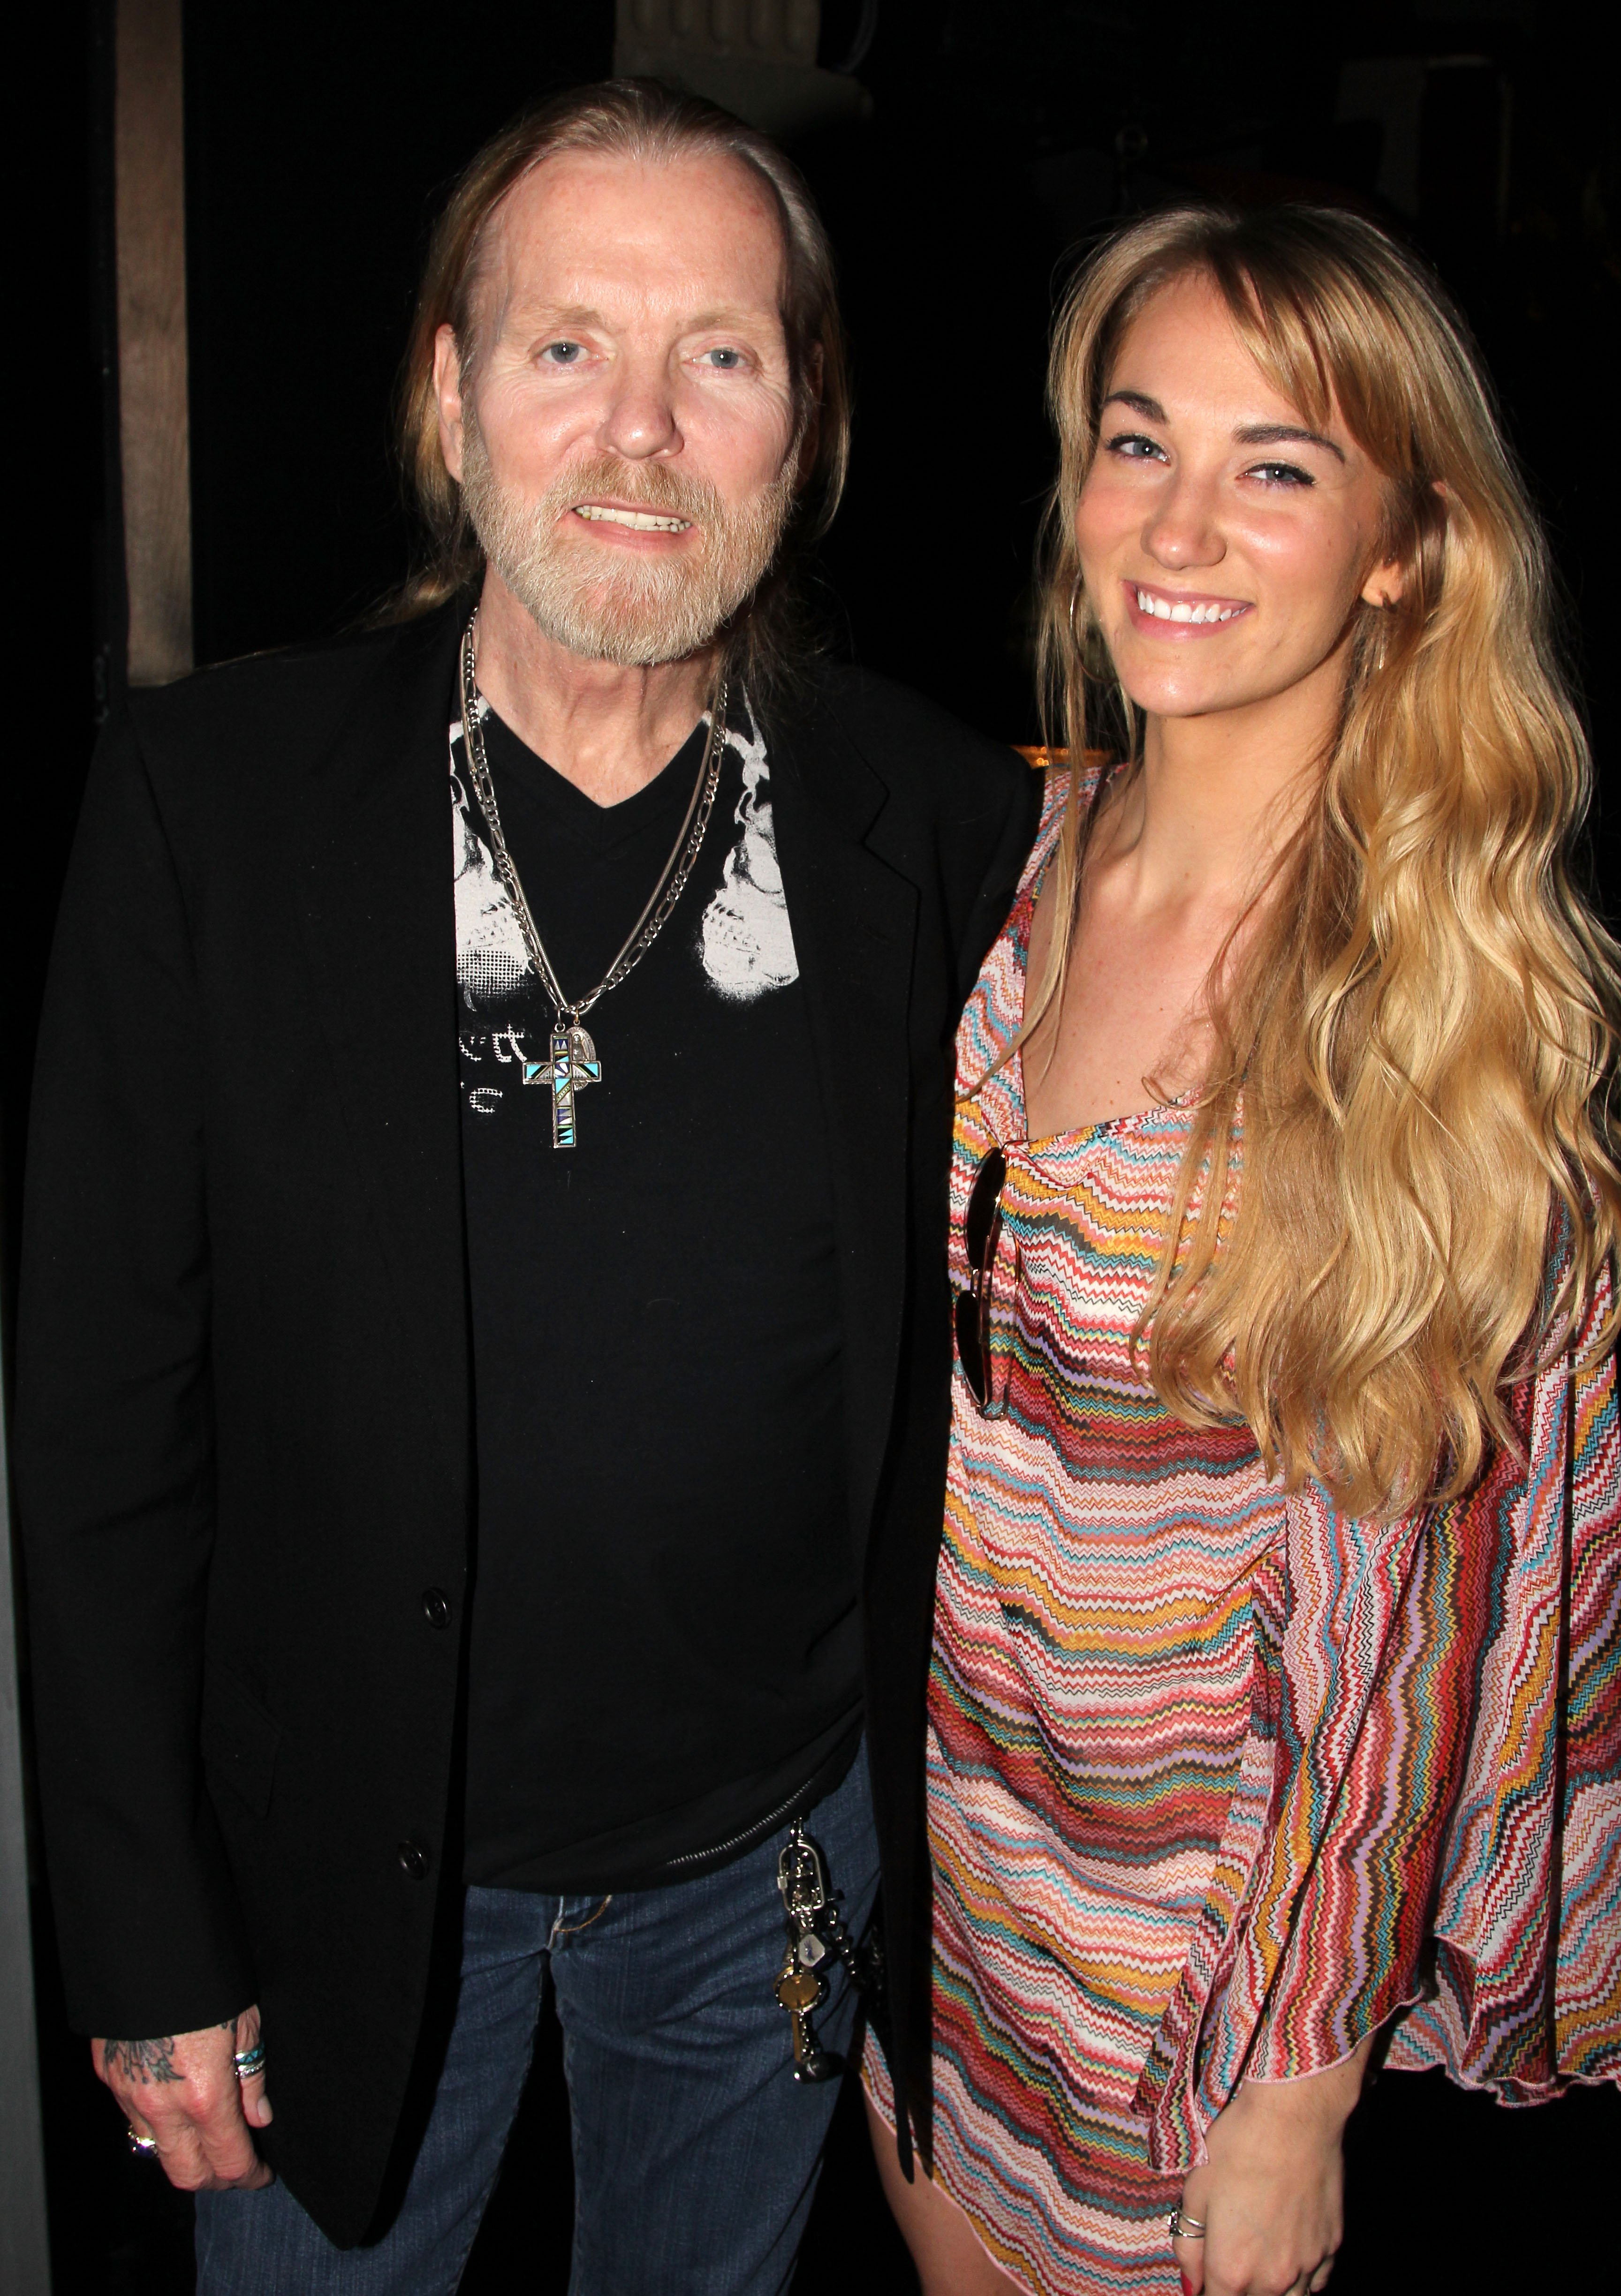 Gregg Allman and Shannon Williams attend the hit musical "Jesus Christ Superstar" on Broadway at The Neil Simon Theater on June 15, 2012, in New York City. | Source: Getty Images